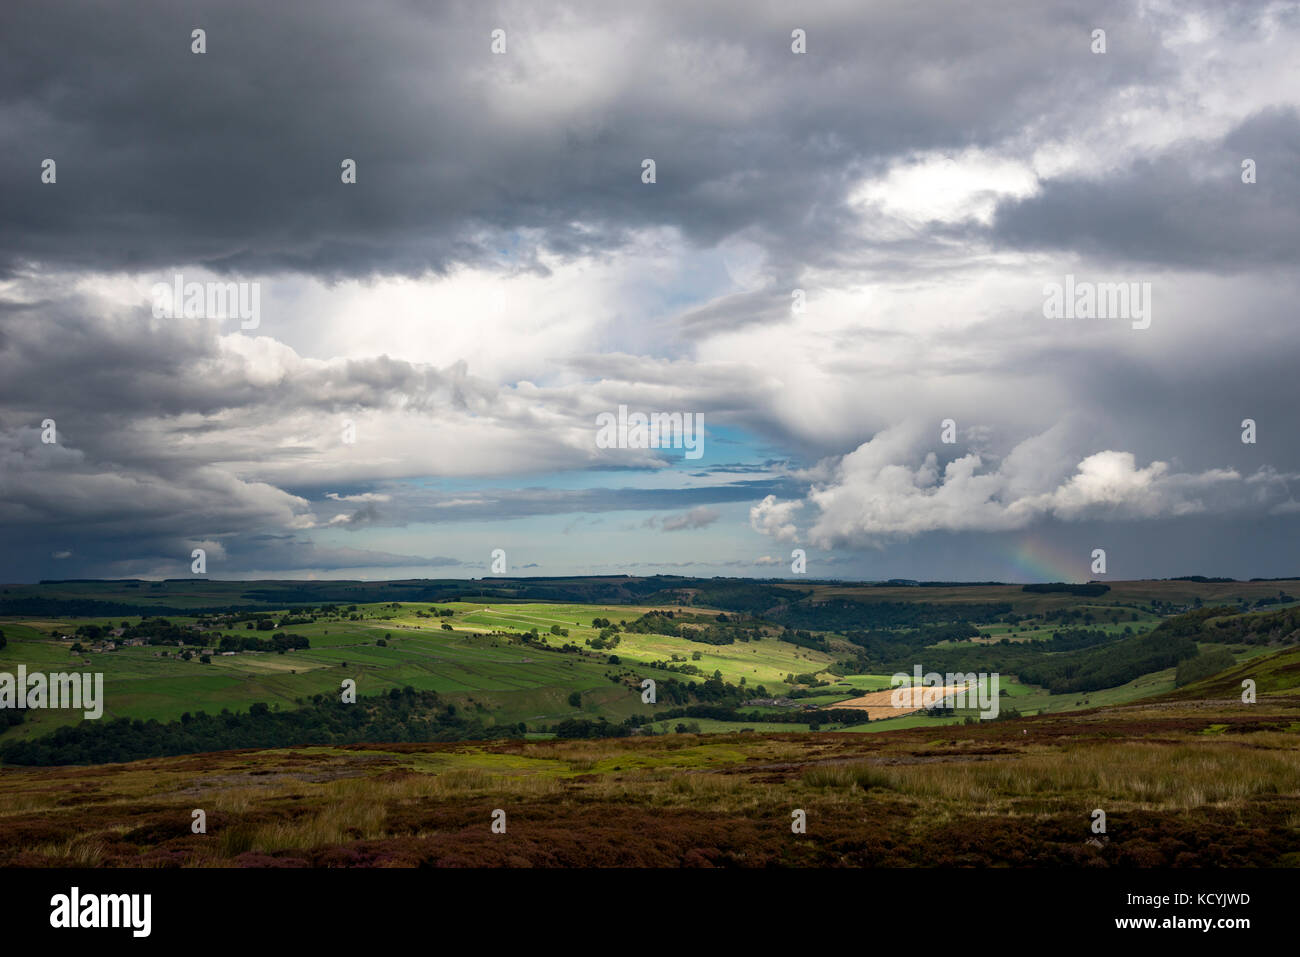 Big sky over lower Swaledale in the Yorkshire Dales, England. View from Grinton looking down the valley towards Richmond. Stock Photo